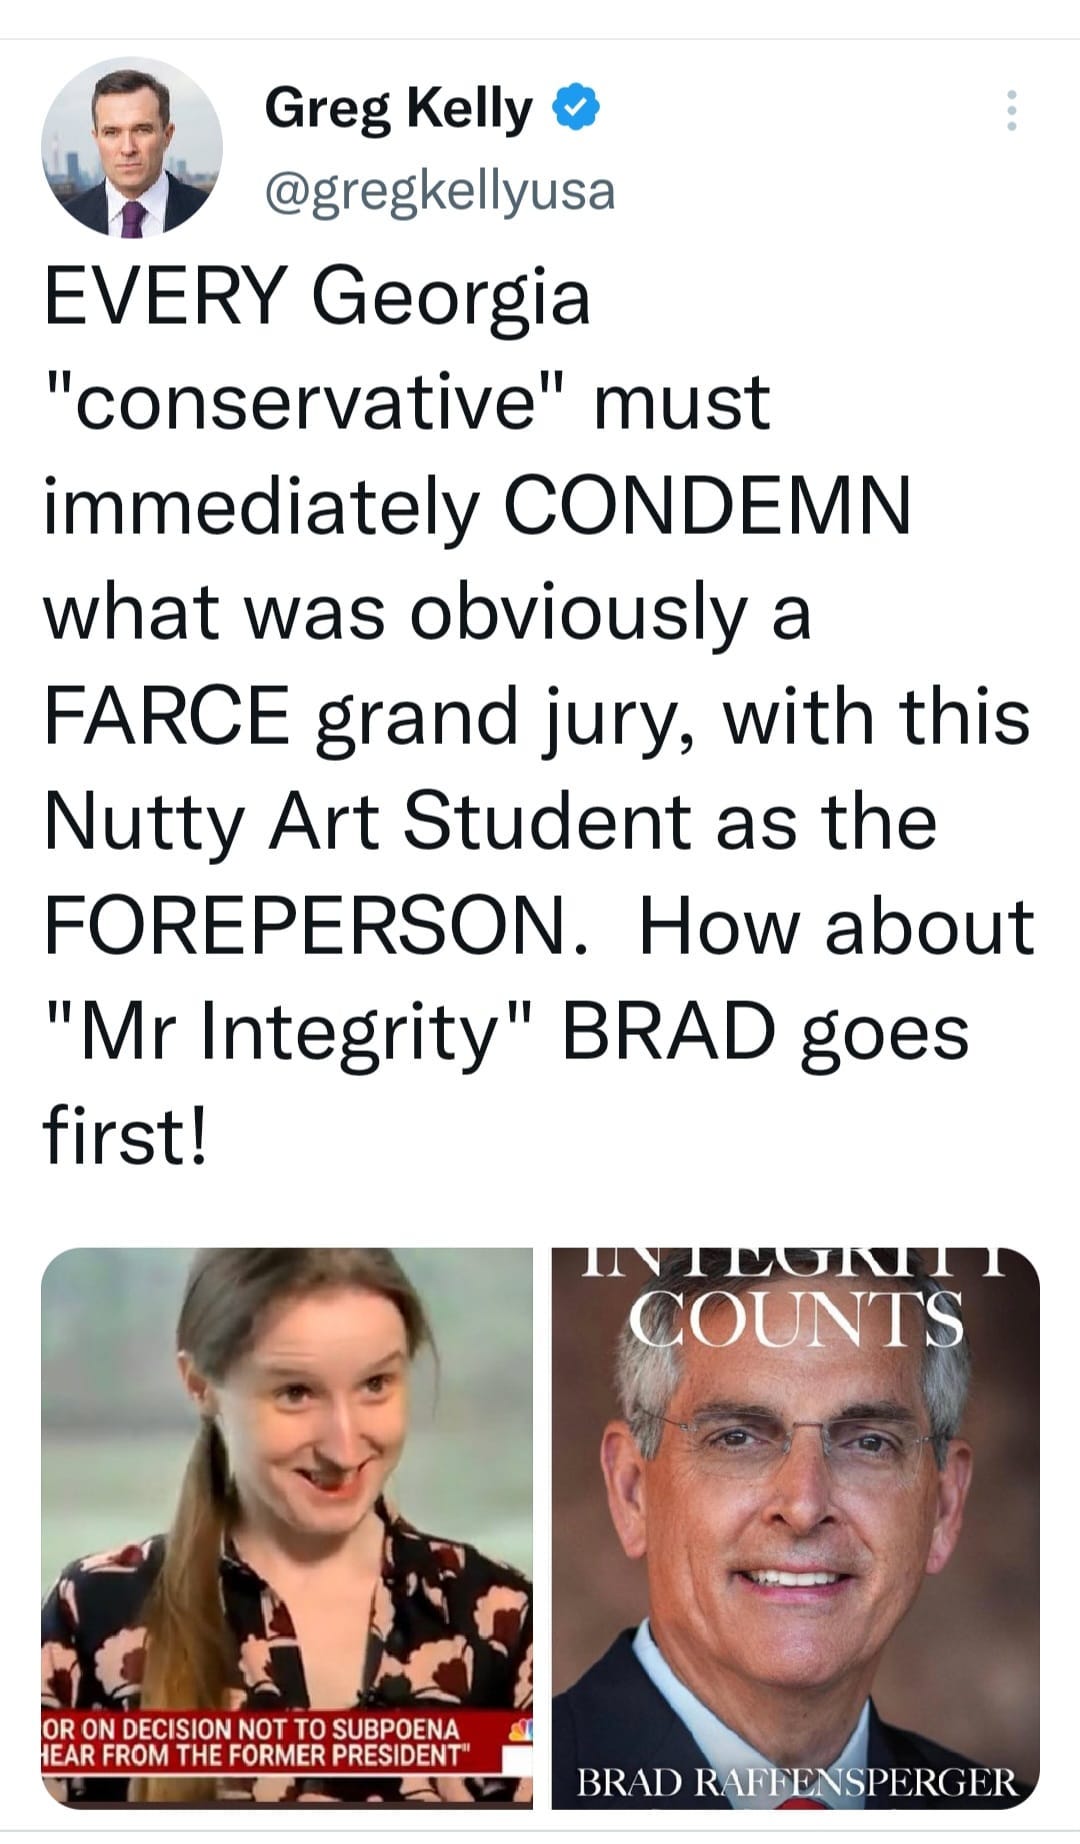 May be an image of 3 people and text that says 'Greg Kelly @gregkellyusa EVERY Georgia "conservative" must immediately CONDEMN what was obviously a FARCE grand jury, with this Nutty Art Student as the FOREPERSON. How about "Mr Integrity" BRAD goes first! INTUONITT COUNTS OR DEISINOT TO SUBPOENA HEAR FROM THE FORMER PRESIDENT BRAD BR BRADRAFFENSPERGER RAFFENSPERG'